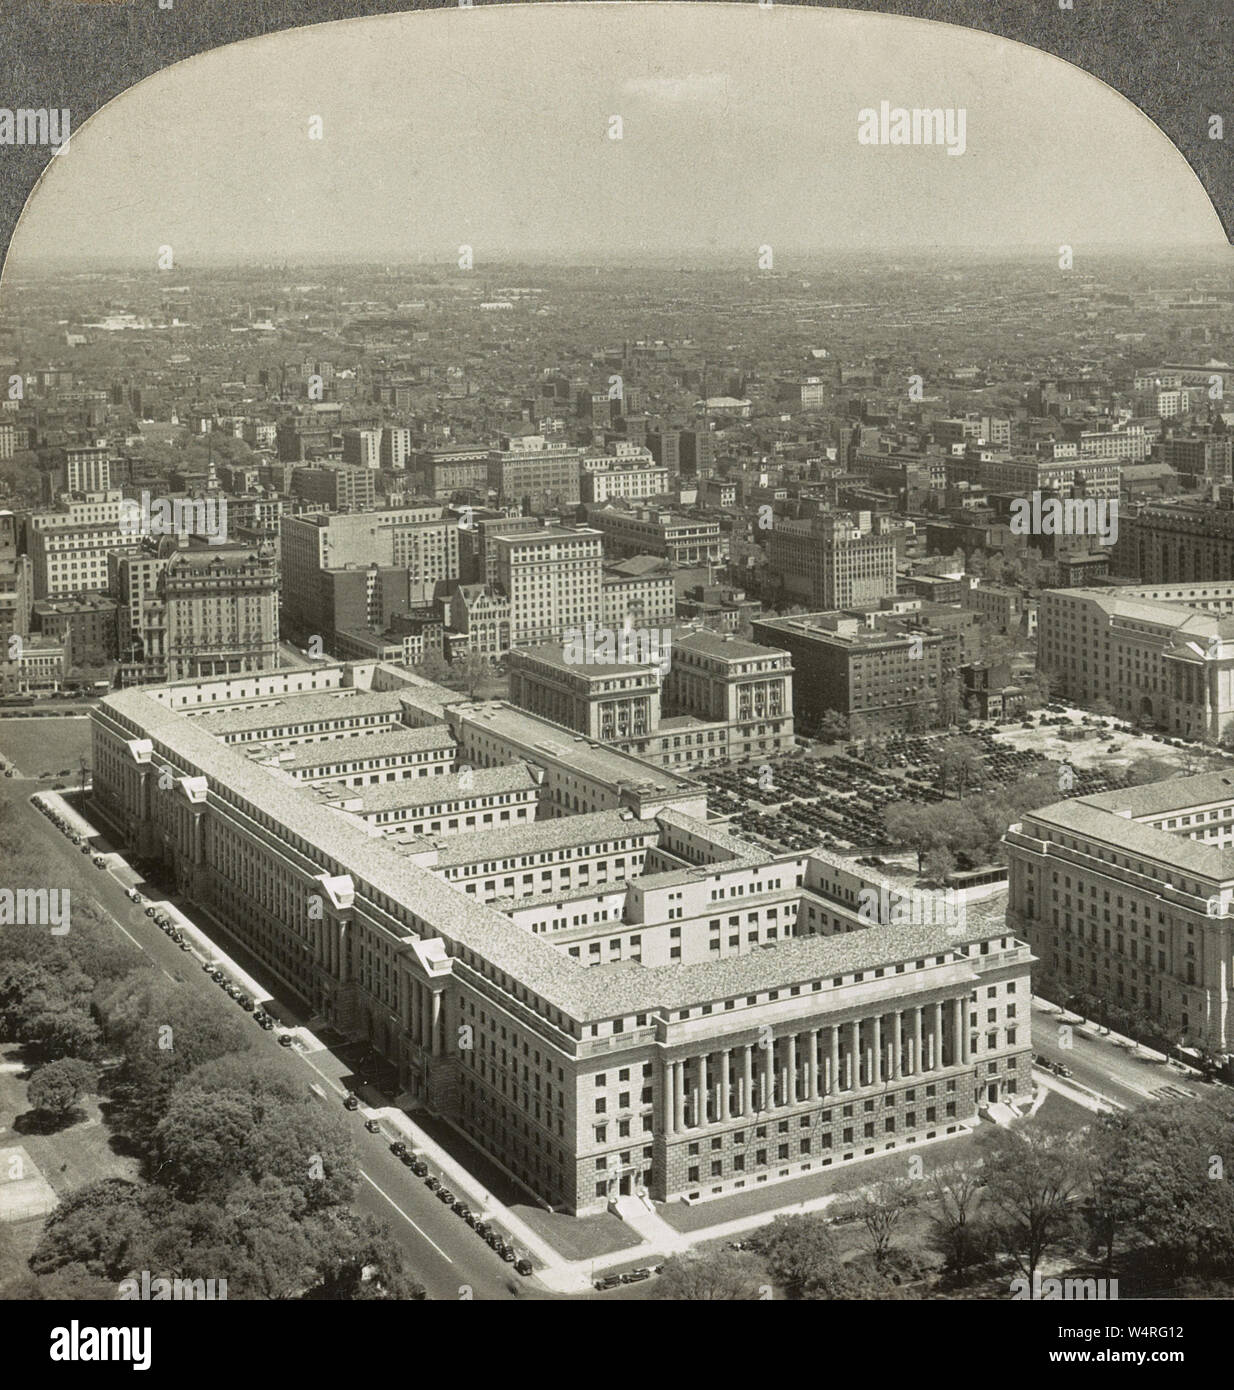 Herbert C. Hoover Building (The Commerce Building) from Washington Monument in 1935. The Herbert C. Hoover Building is the Washington, D.C. headquarters of the United States Department of Commerce. The building is located at 1401 Constitution Avenue, Northwest, Washington, D.C., on the block bounded by Constitution Avenue NW to the south, Pennsylvania Avenue NW to the north, 15th Street NW to the west, and 14th Street NW to the east. Stock Photo